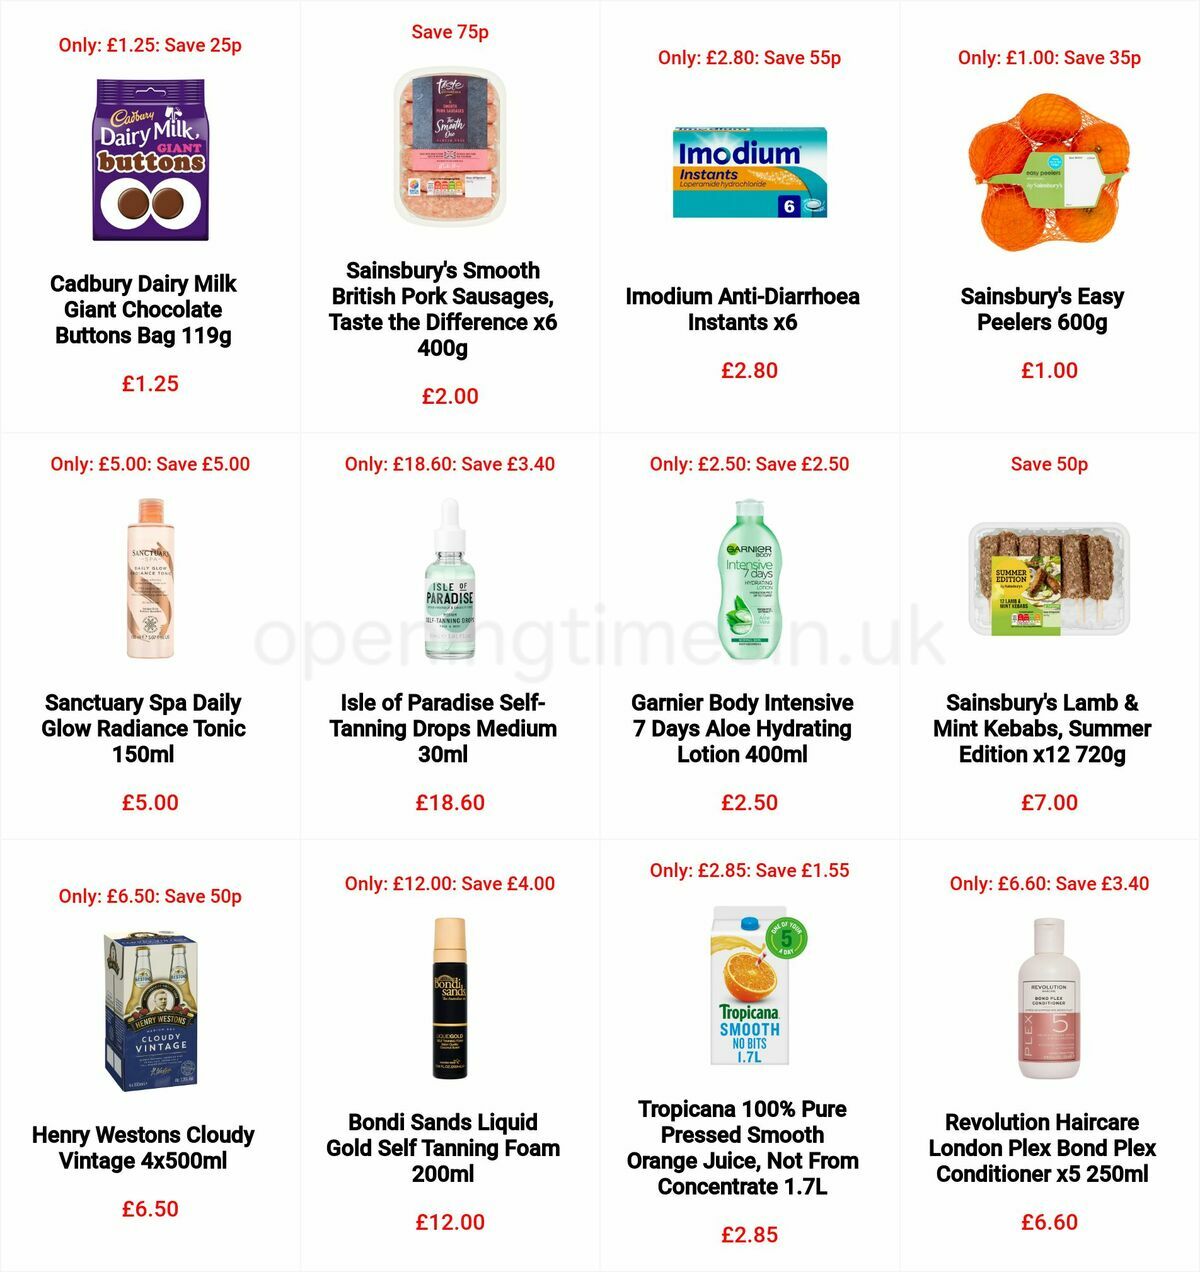 Sainsbury's Offers from 5 August